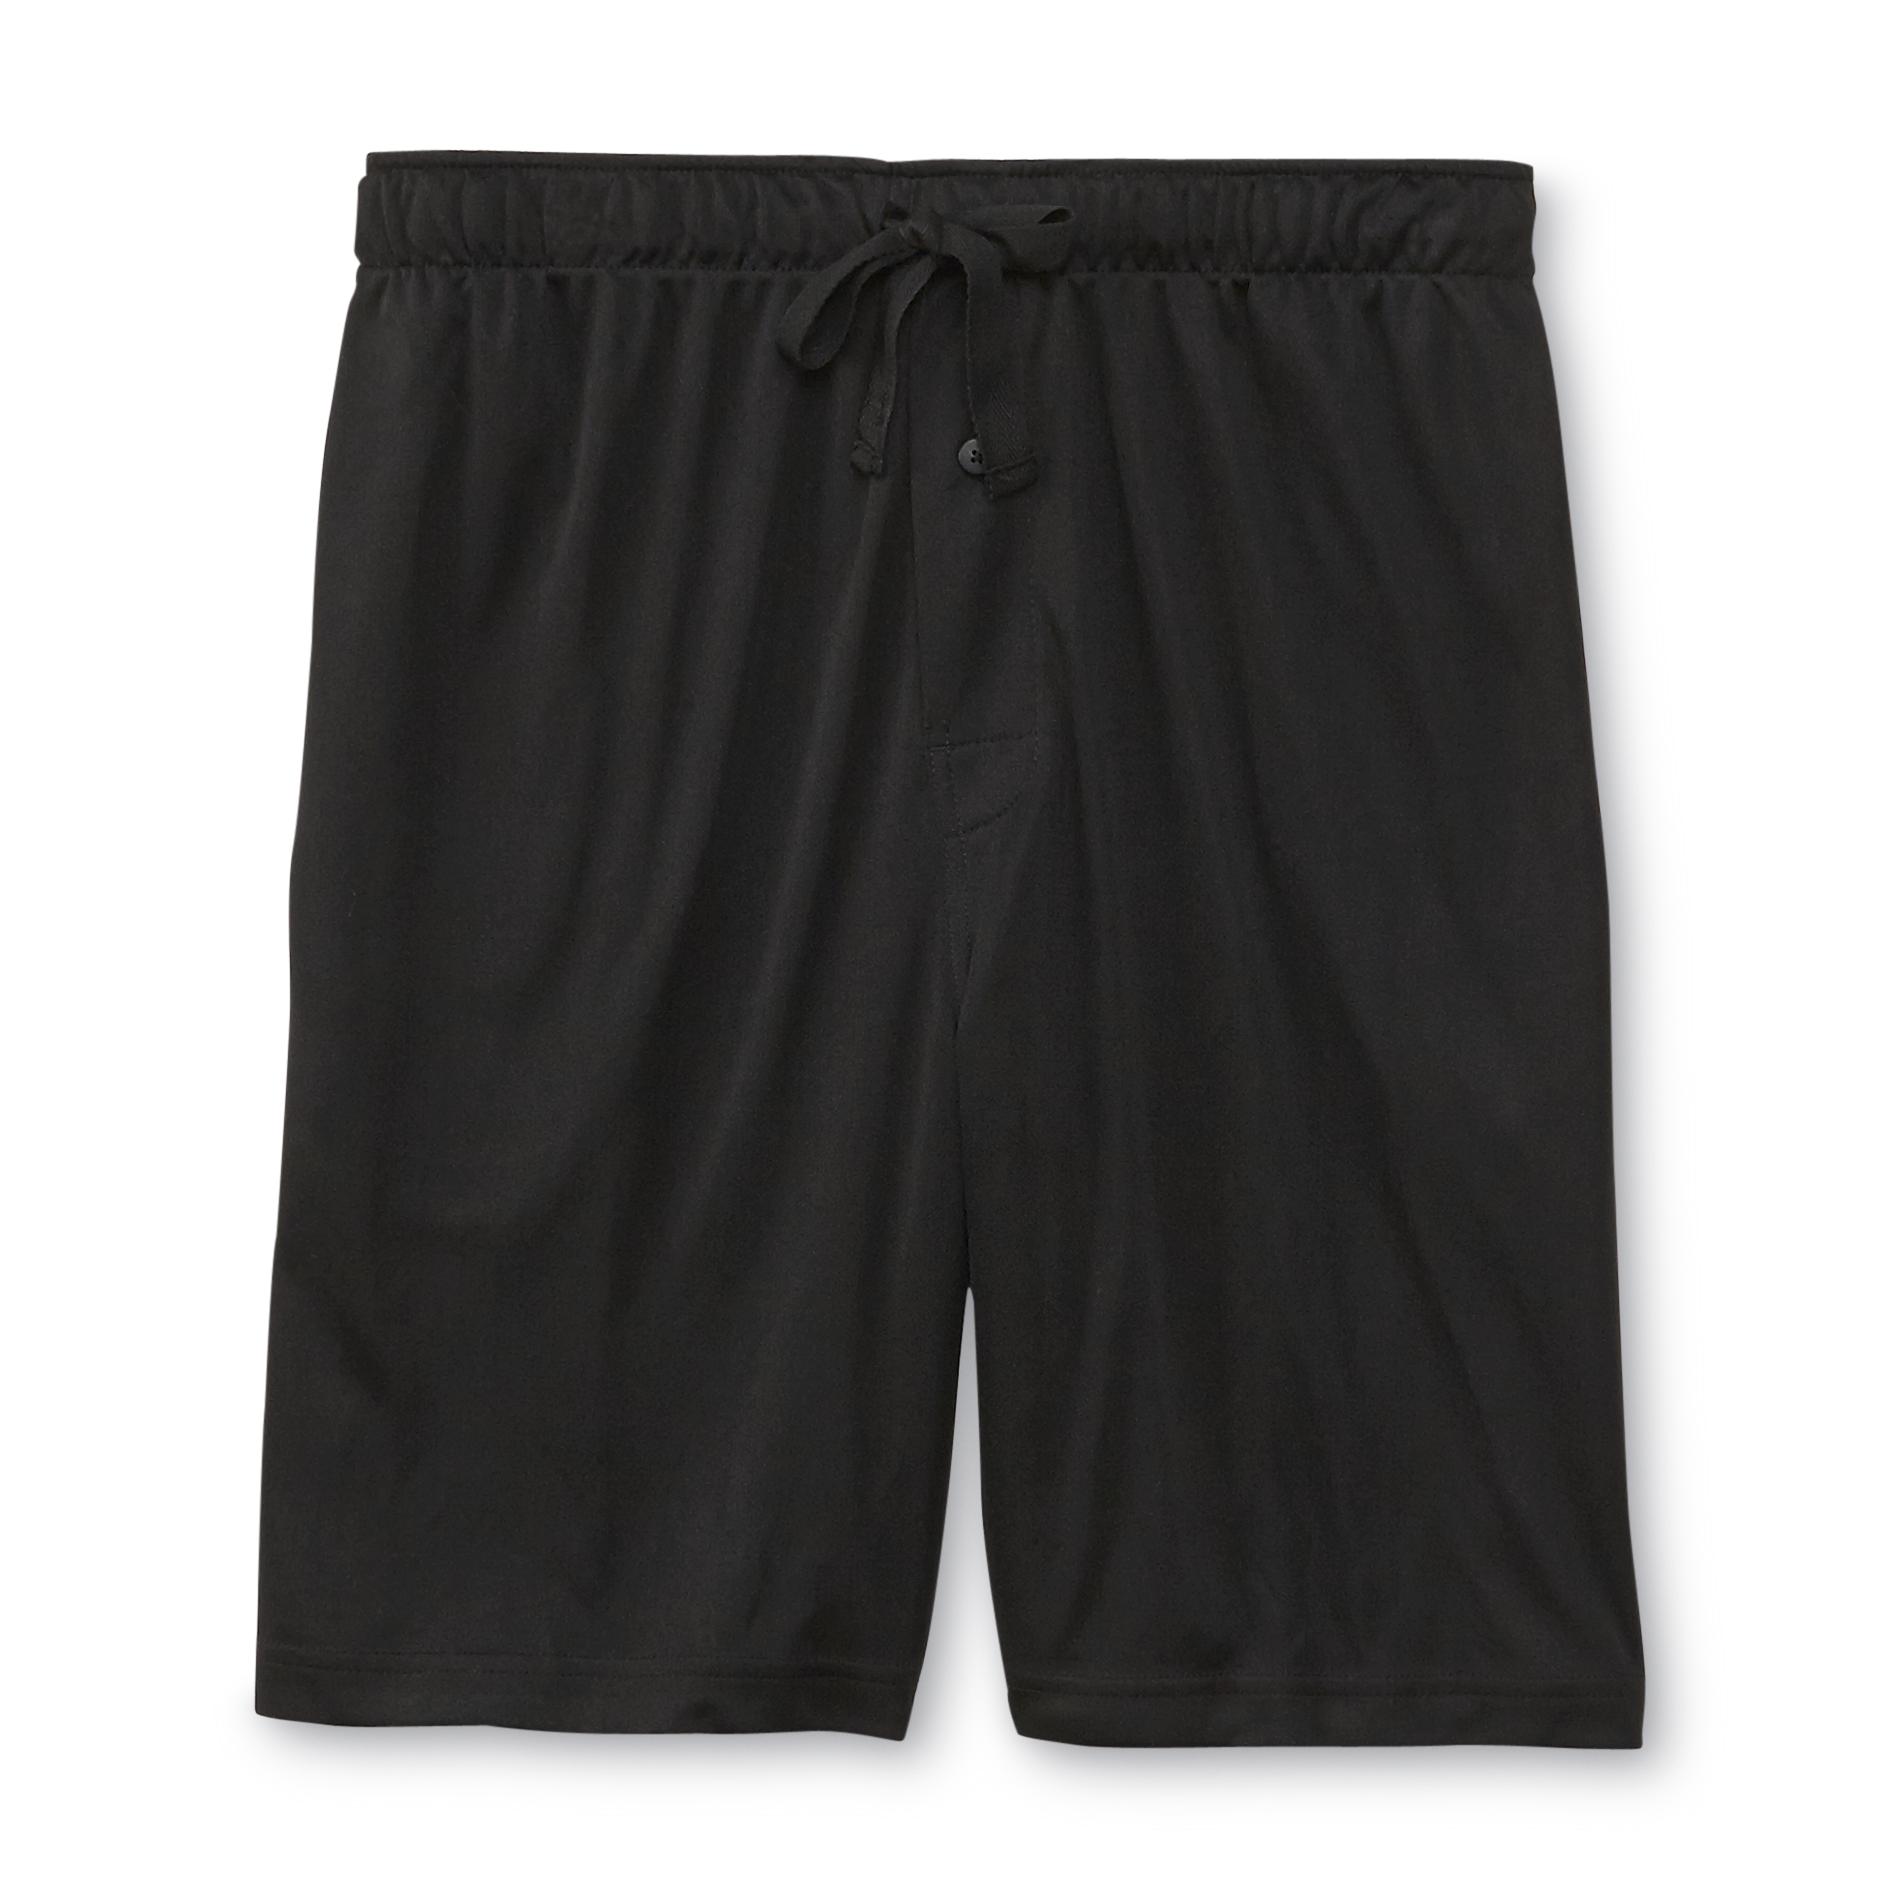 Fruit of the Loom Men's Lounge Shorts